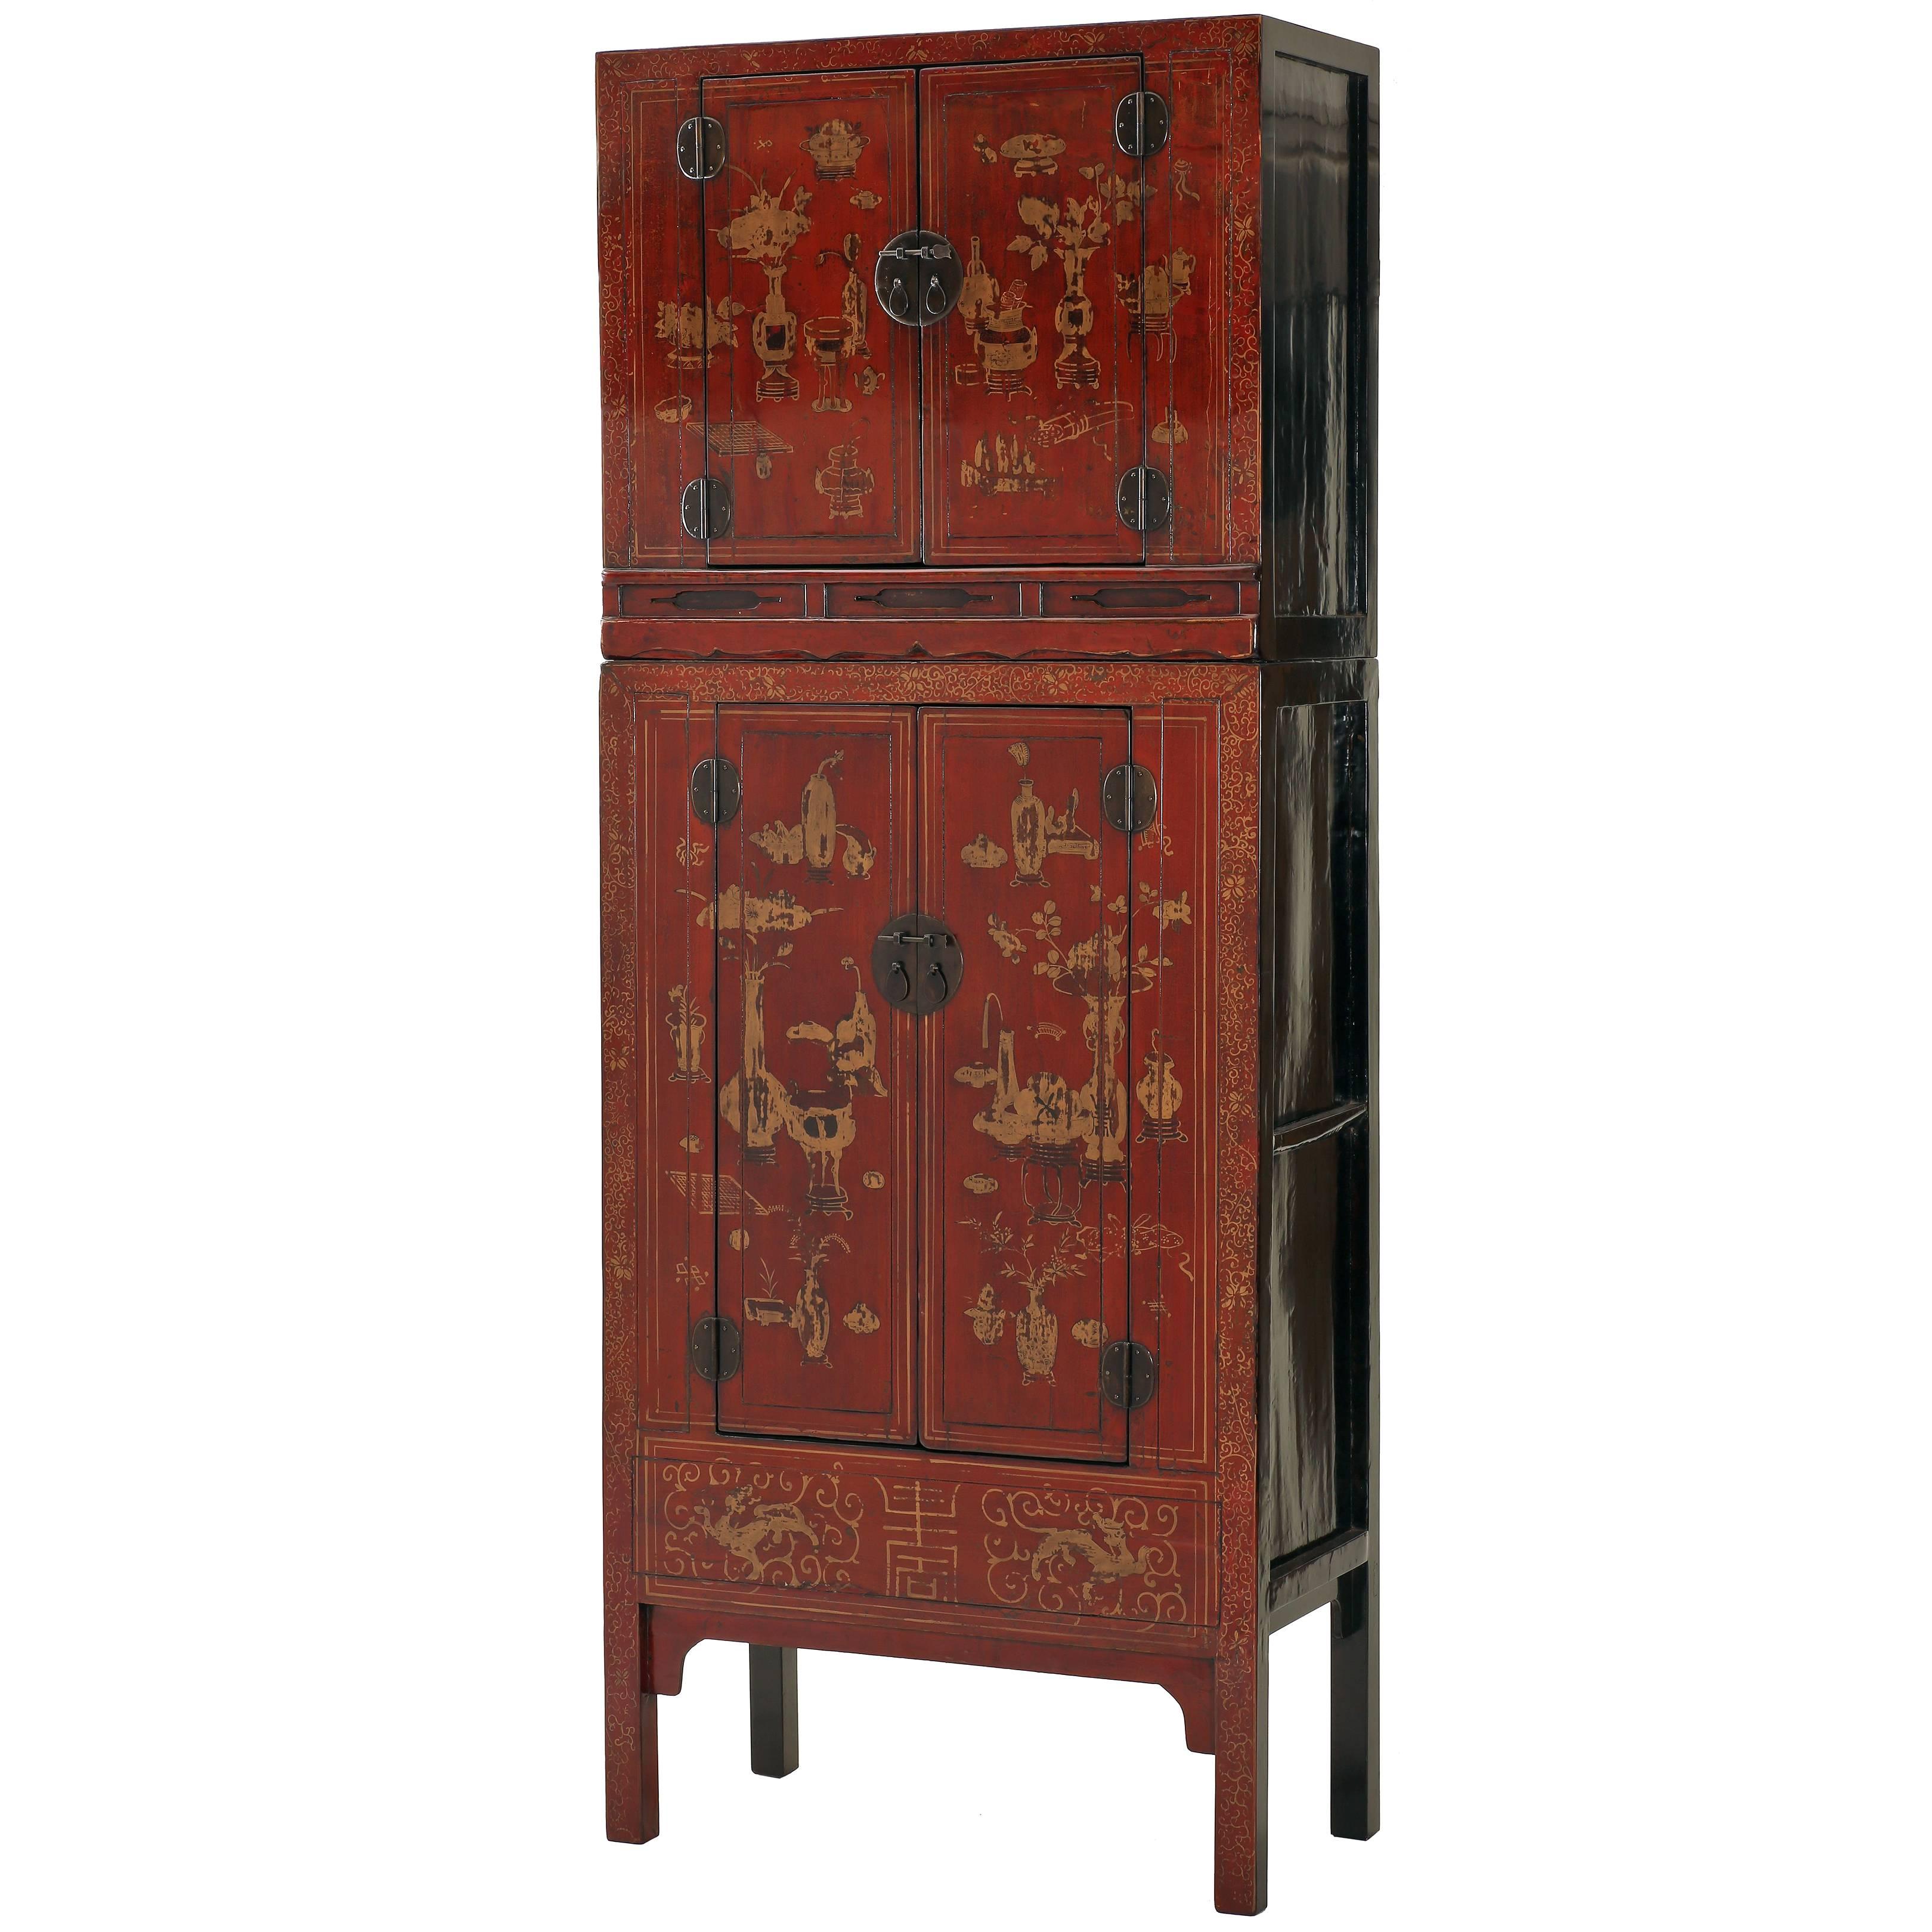 Antique Red Lacquer Gilt Painted Chinese Compound Cabinet, Scholastic Art